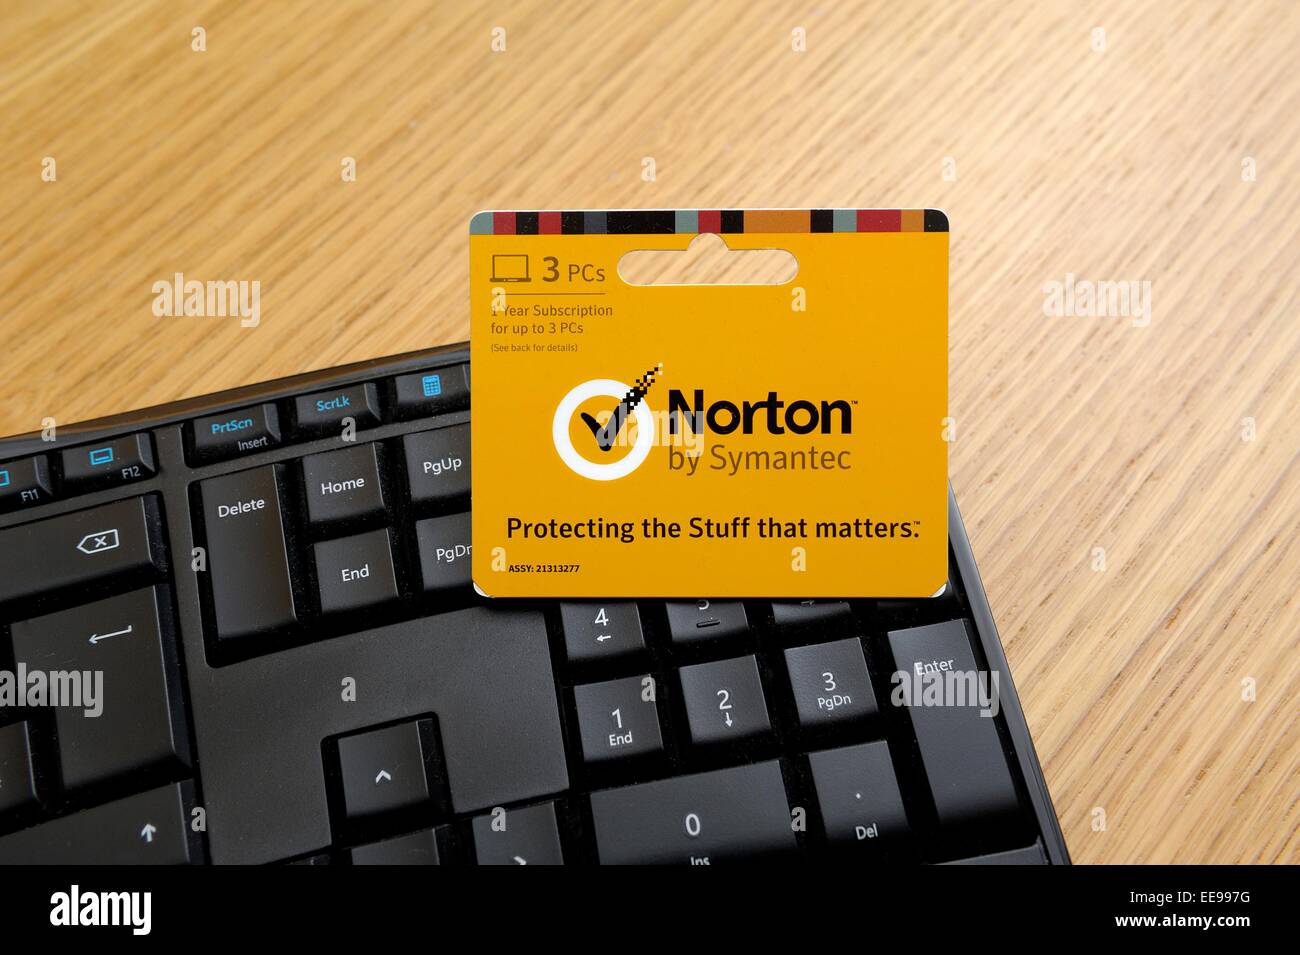 Norton by Symantec 3pc 1 year subscription card uk Stock Photo